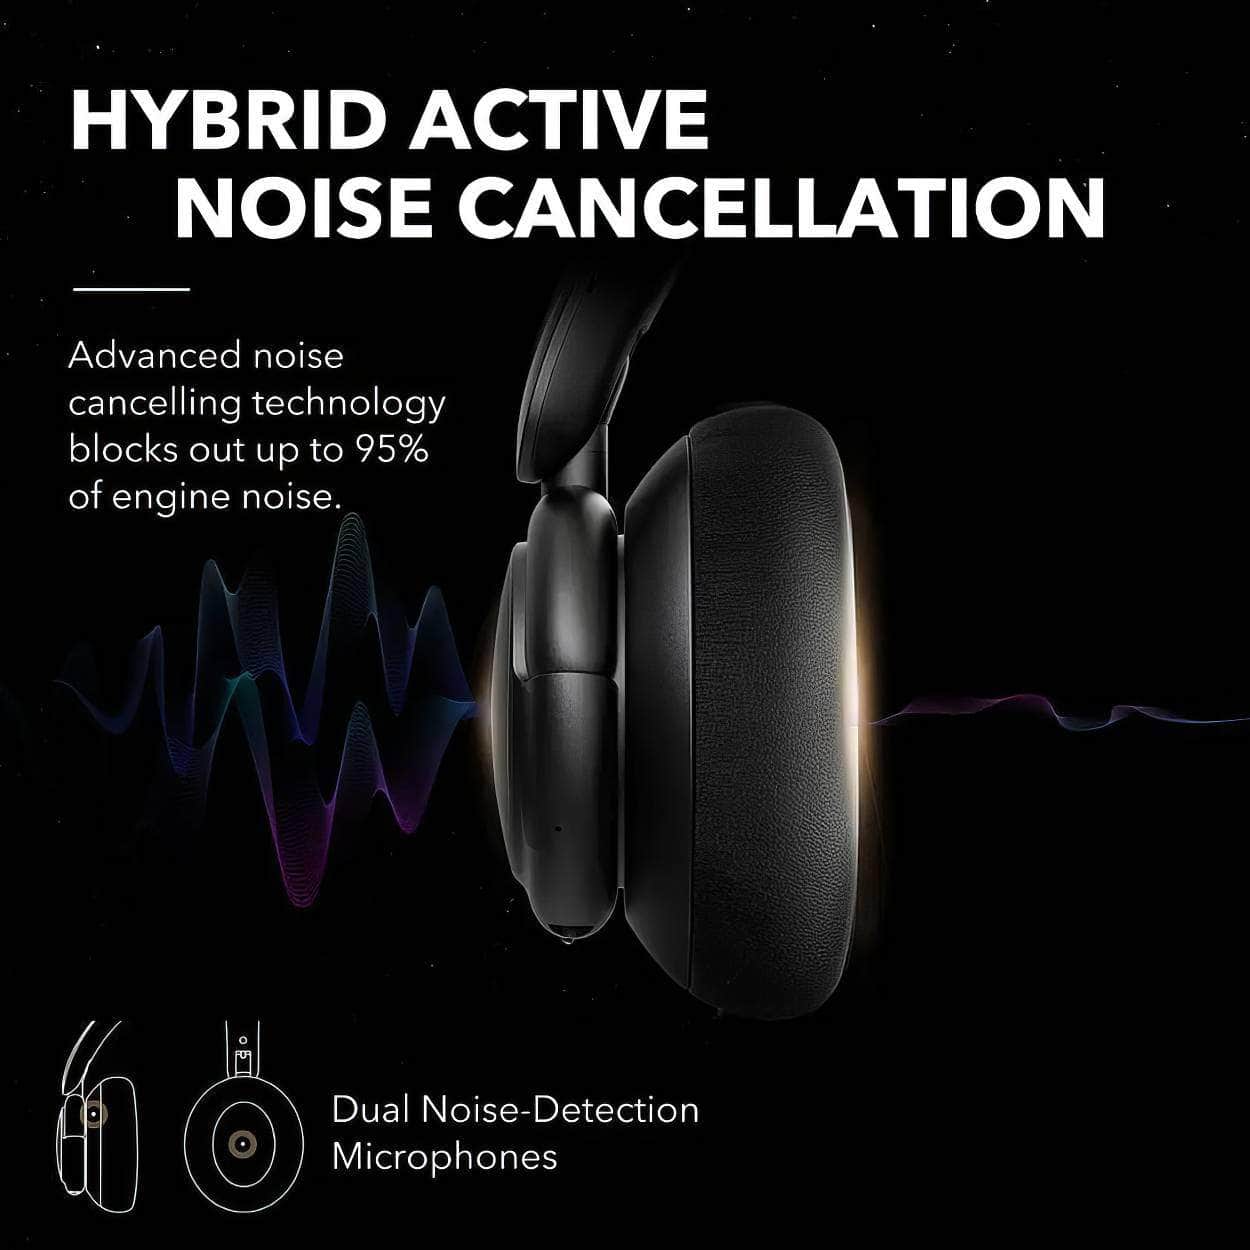 Anker Soundcore Life Q30 Hybrid Active Noise Cancelling Wireless Bluetooth Headphones - Multiple Modes, Hi-Res Sound, 40-Hour Battery Life